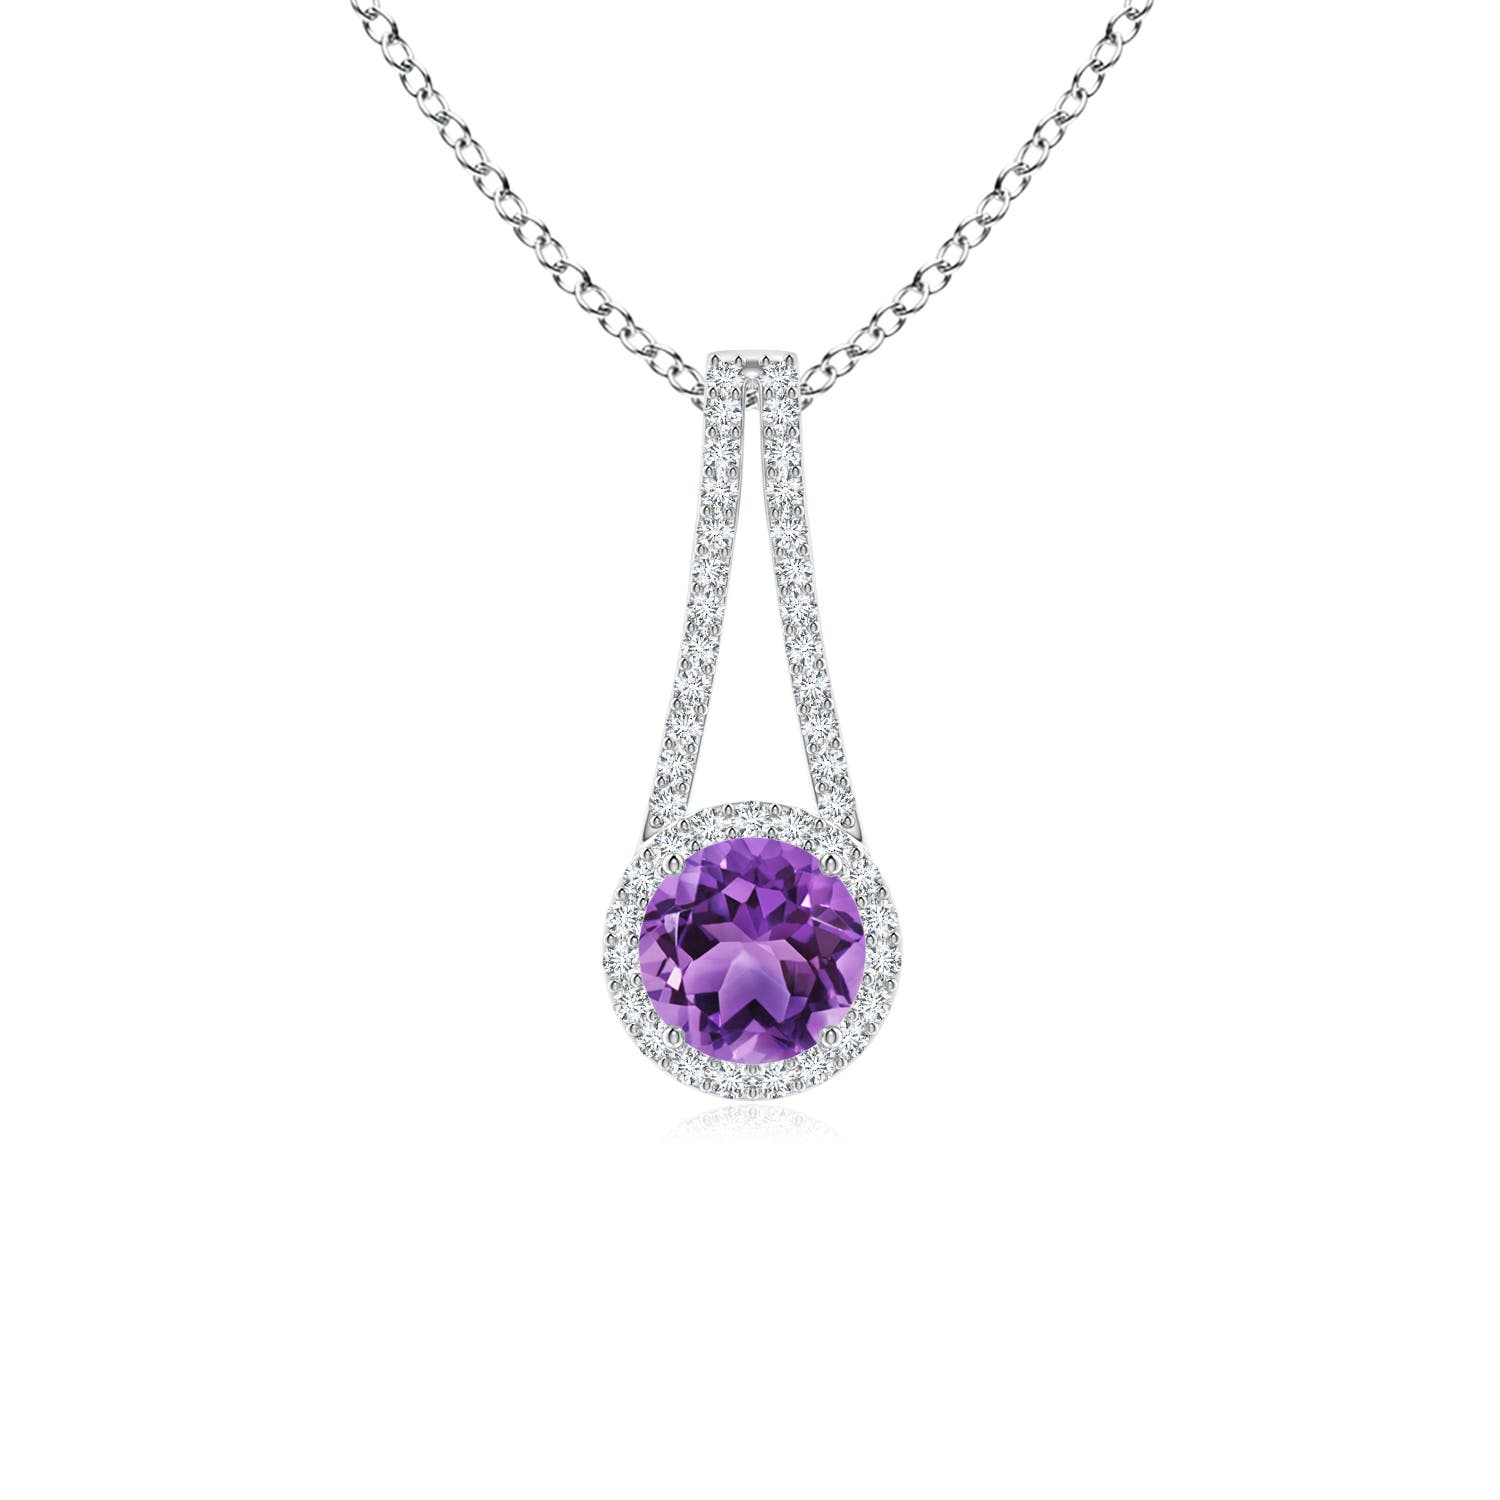 AA - Amethyst / 1.02 CT / 14 KT White Gold